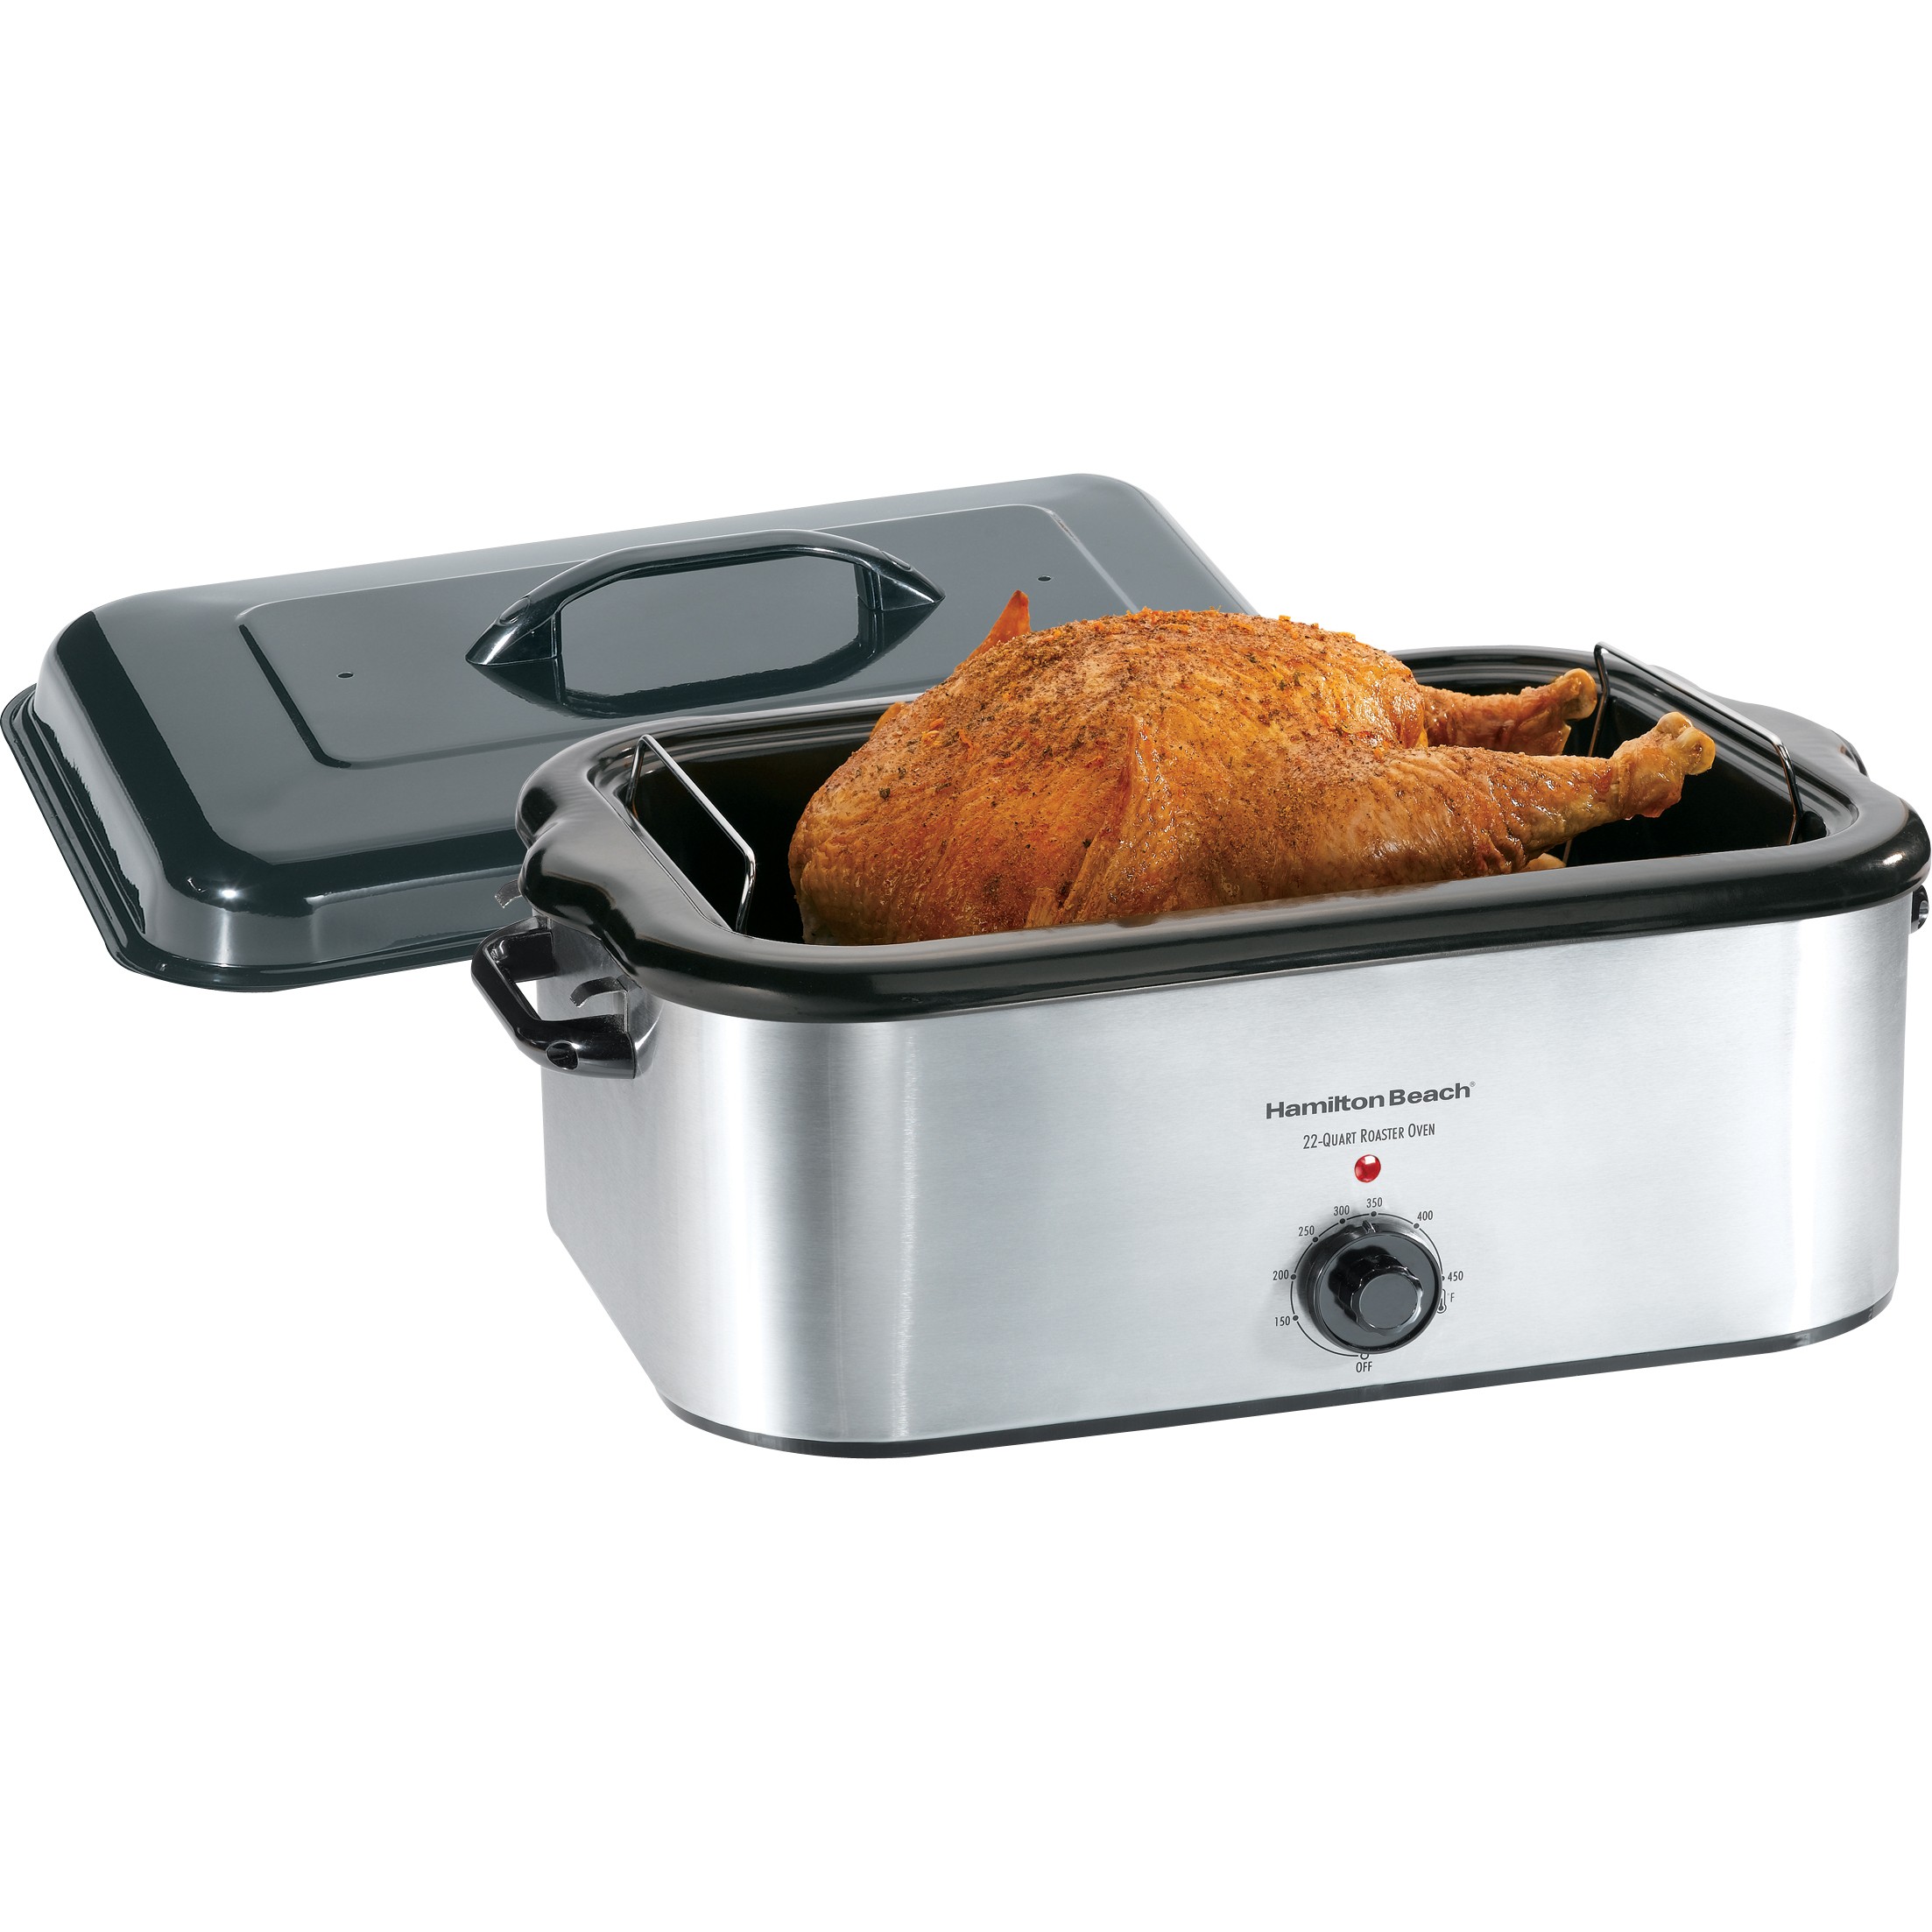 Open Box: Hamilton Beach 32215 Stainless Steel 22 Quart Stainless Steel Electric  Roaster Oven 